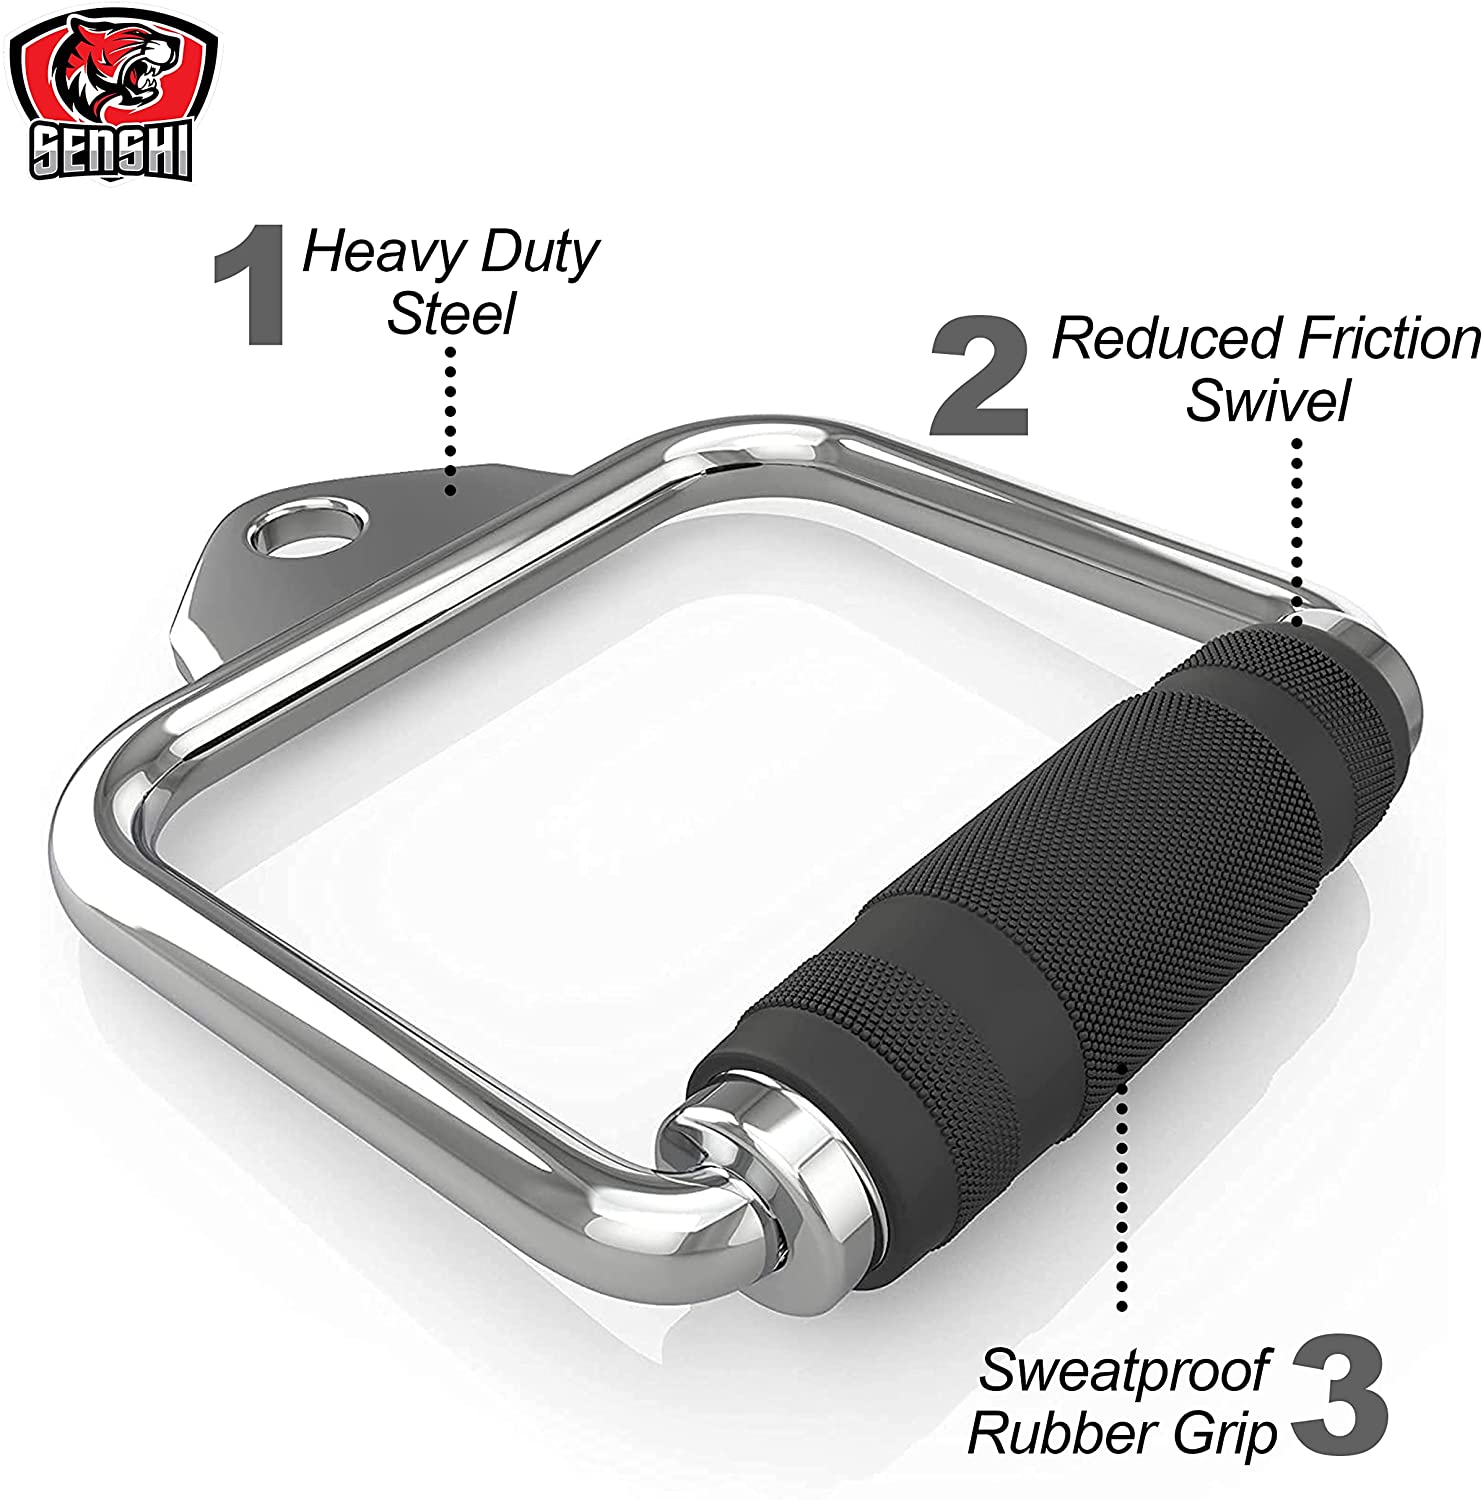 SOLID Metal Stirrup Handle with Rubber Grips | D Handle for Cable Machines, Multigyms, And Weight Lifting